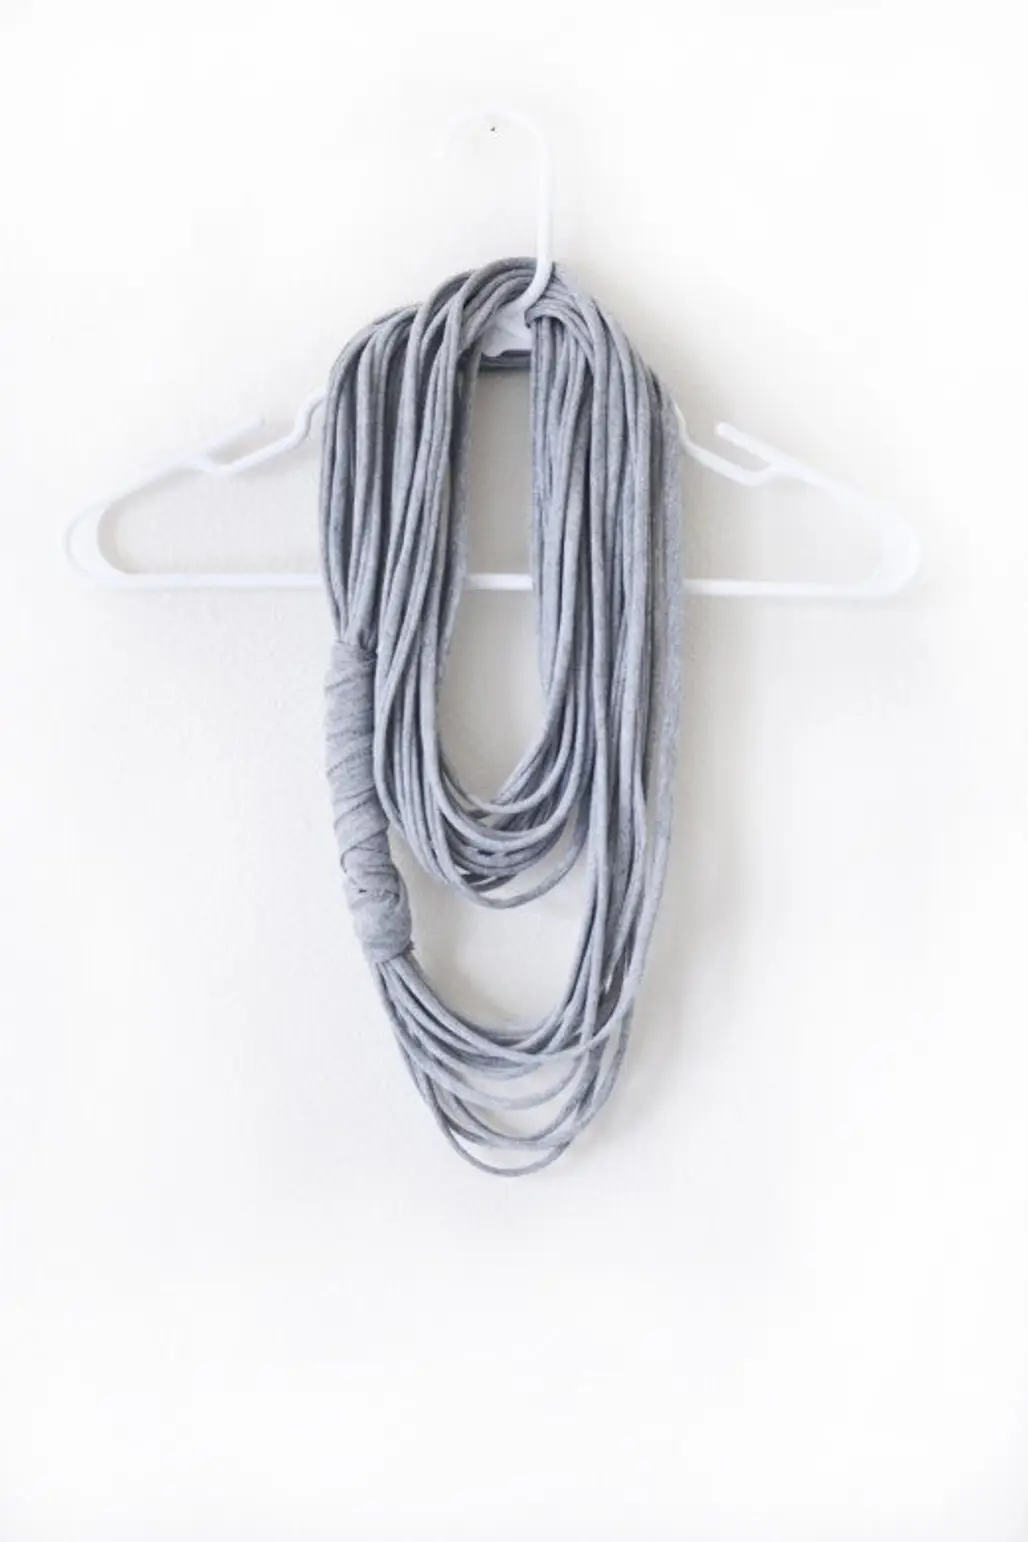 DIY Multi-strand Scarf from a T-shirt